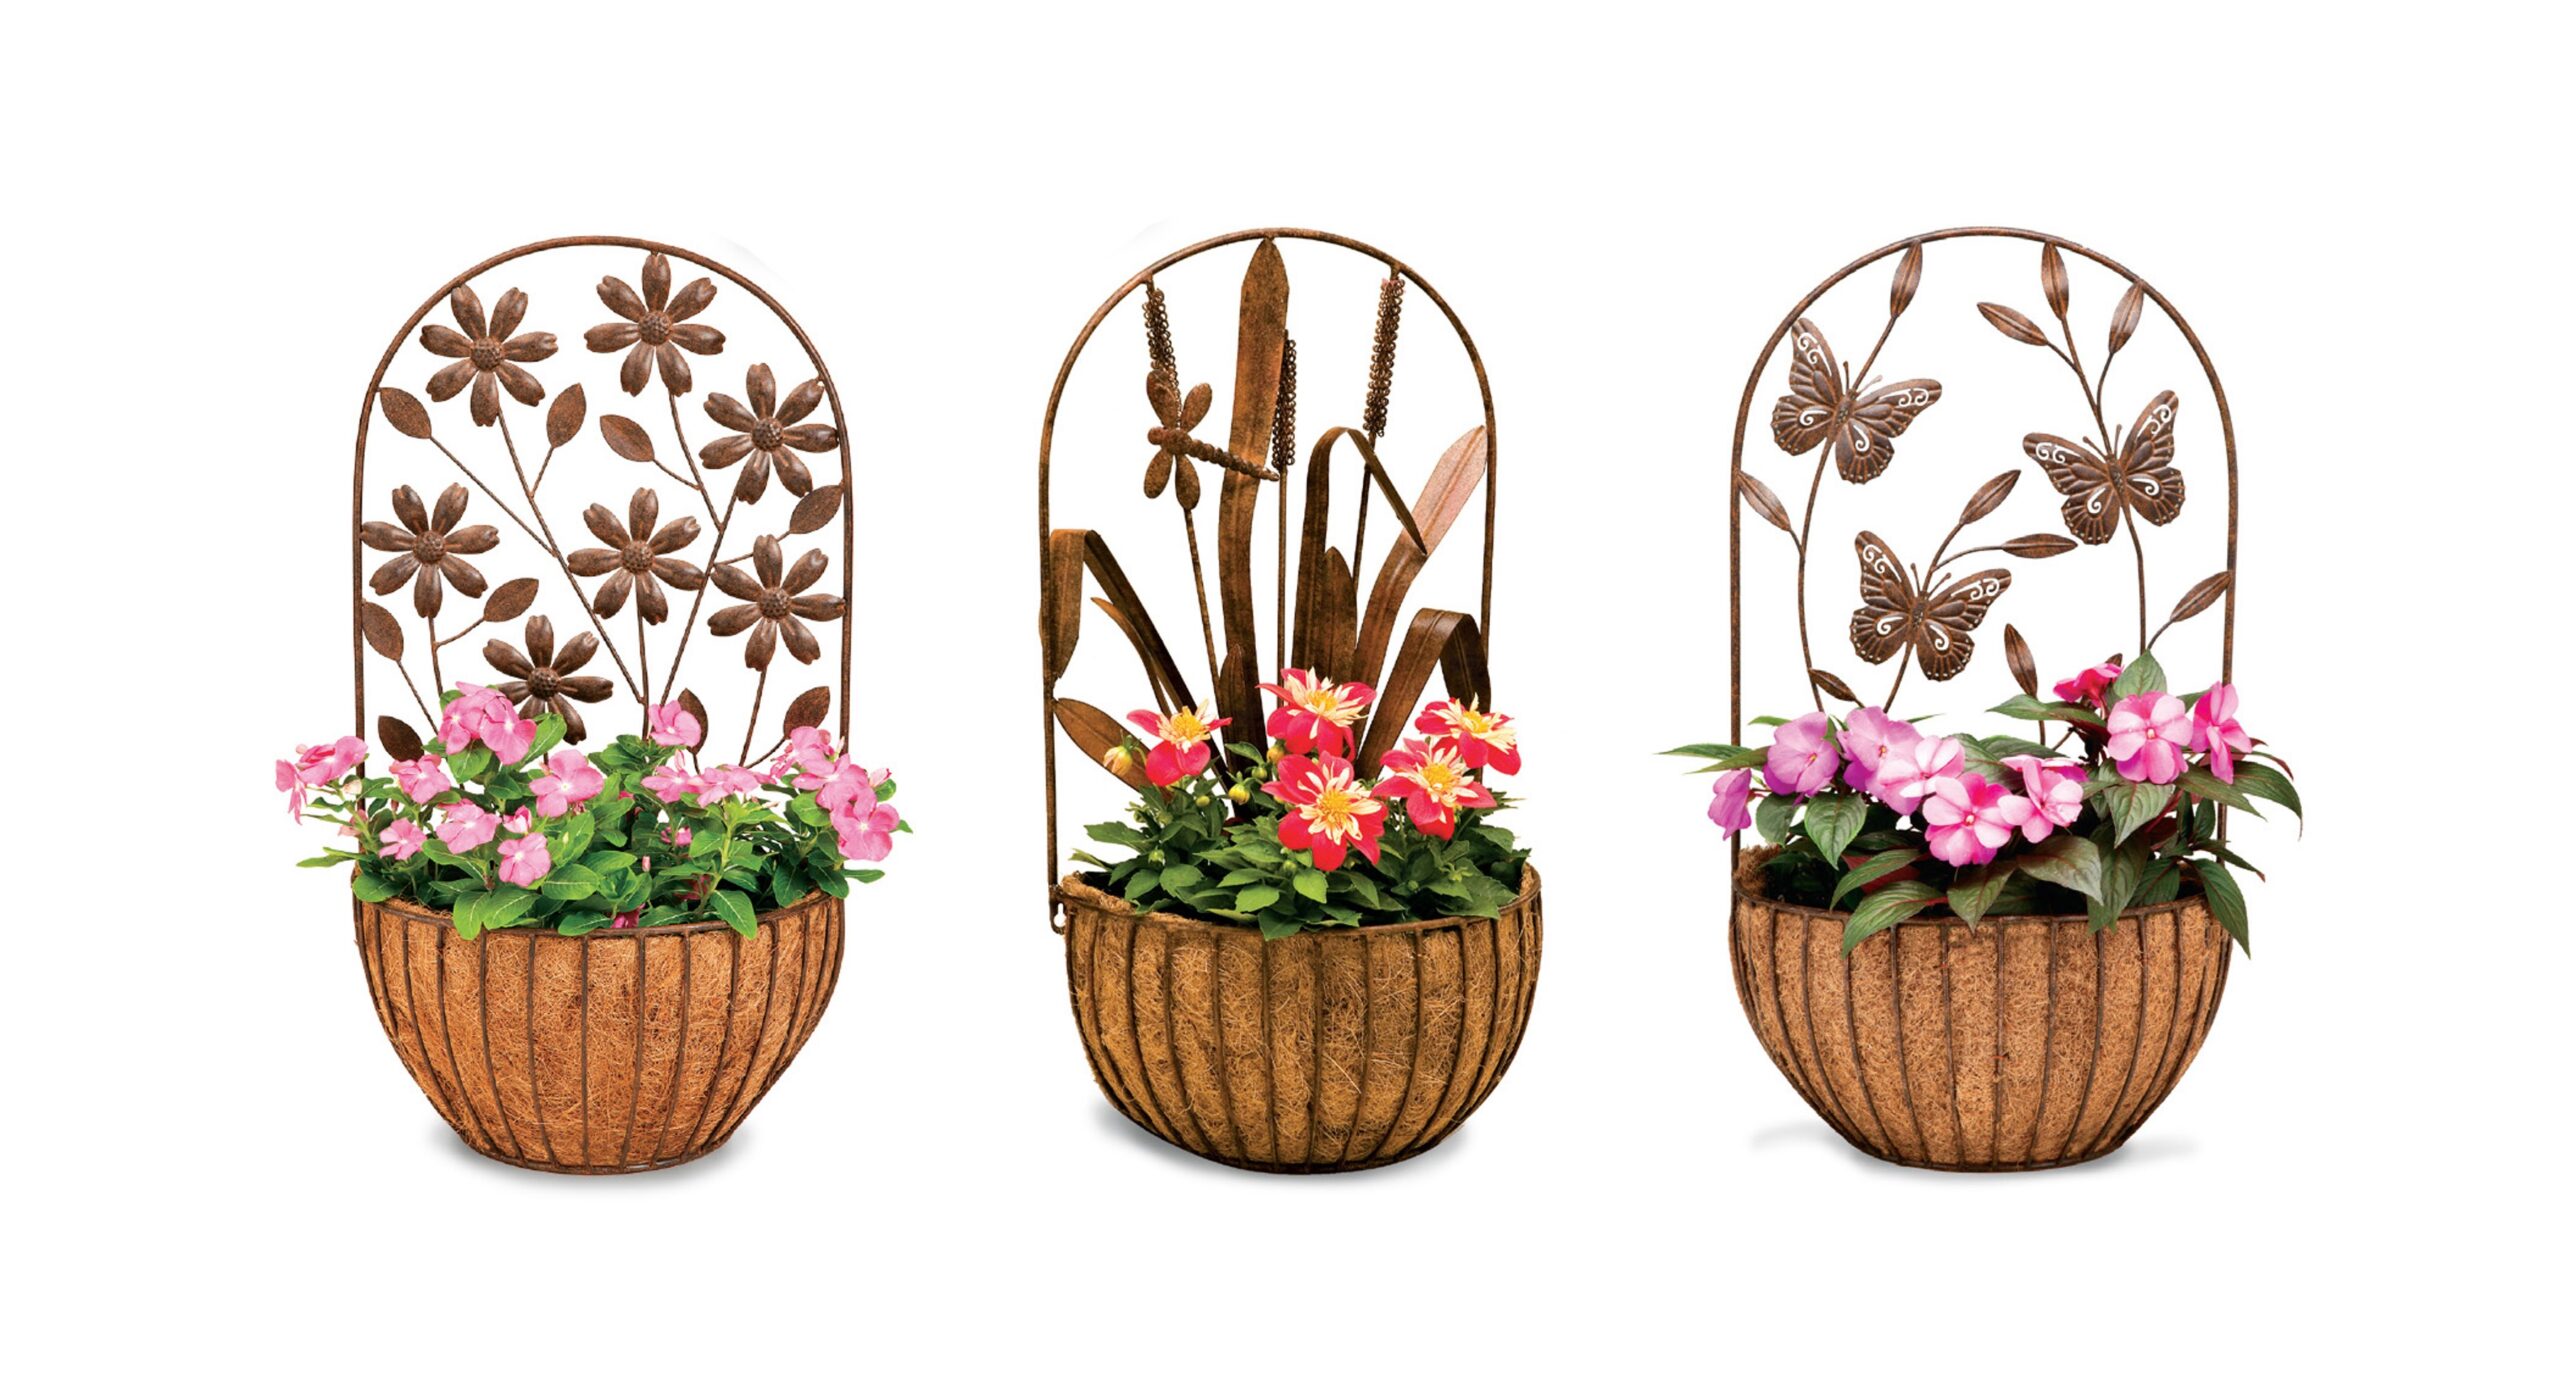 Deer Park Ironworks Floral, Dragonfly, and Butterfly Wall Baskets w/ Coco Liner - Set of 3